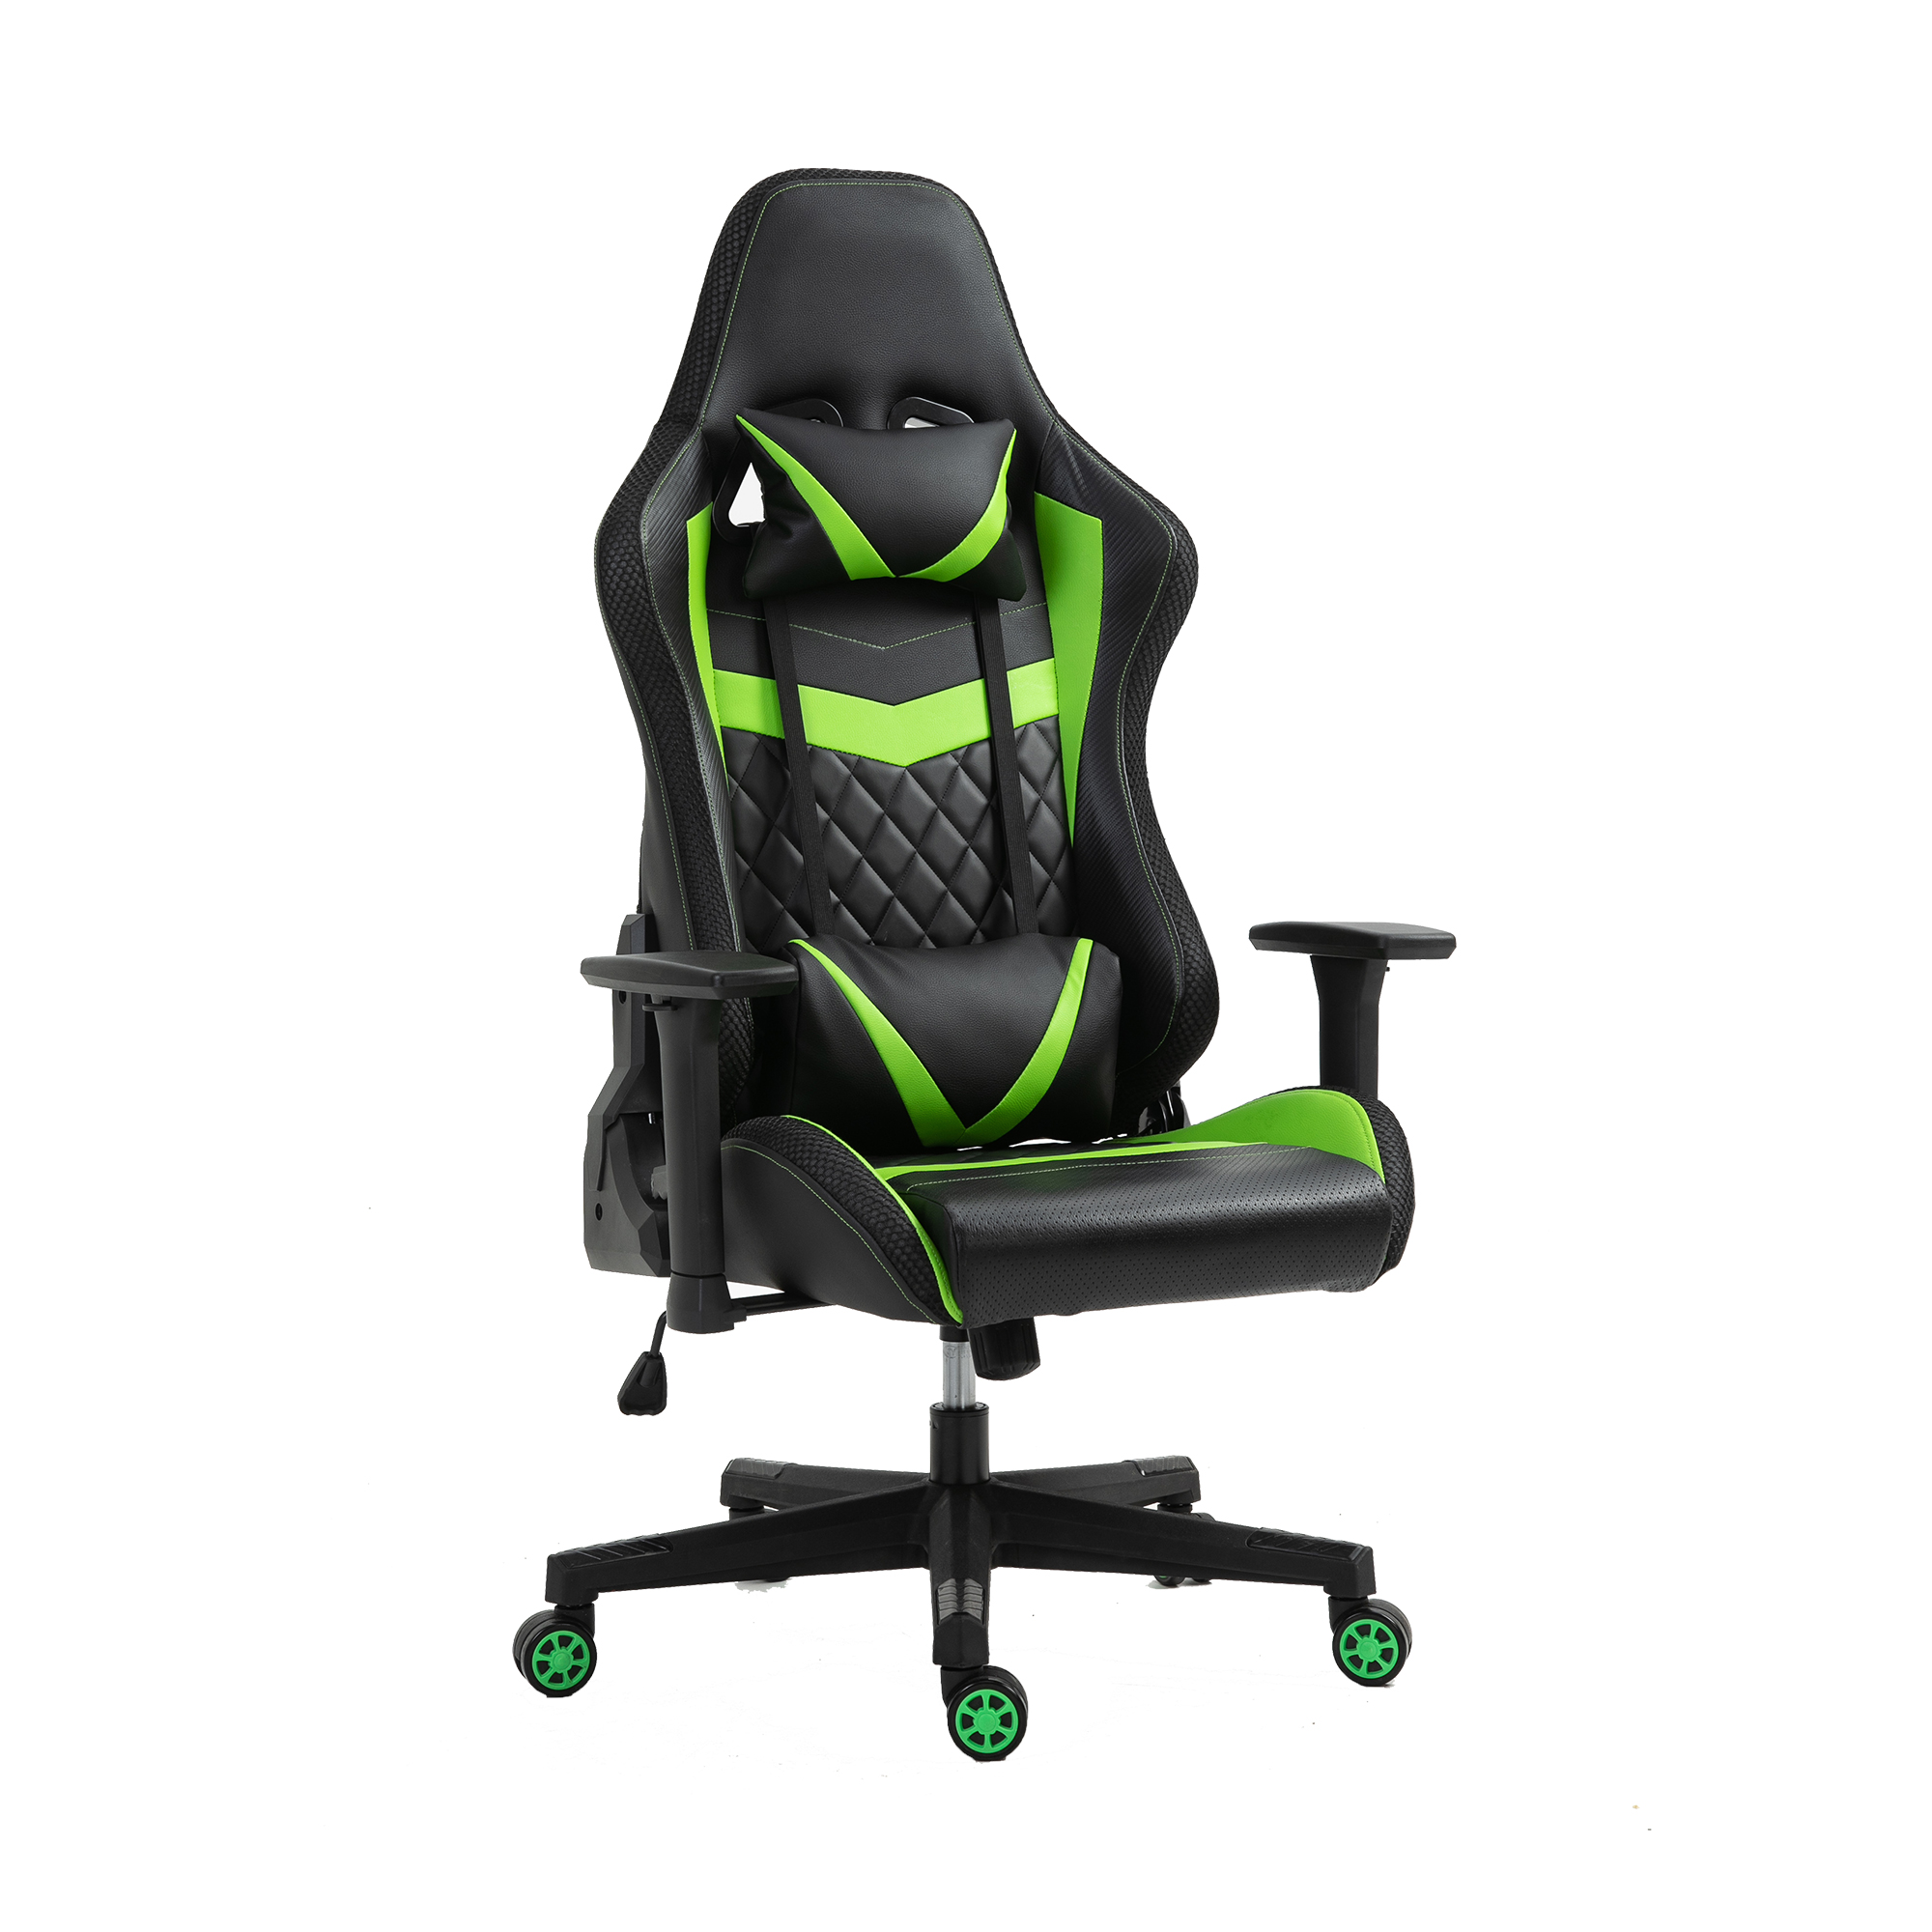 China wholesale Unicorn Gaming Chair Manufacturers –  Free Sample Hot Selling Cheap Leather Racing Chair For Gamer Home Office Chairs PC Gaming Setups – ANJI JIFANG